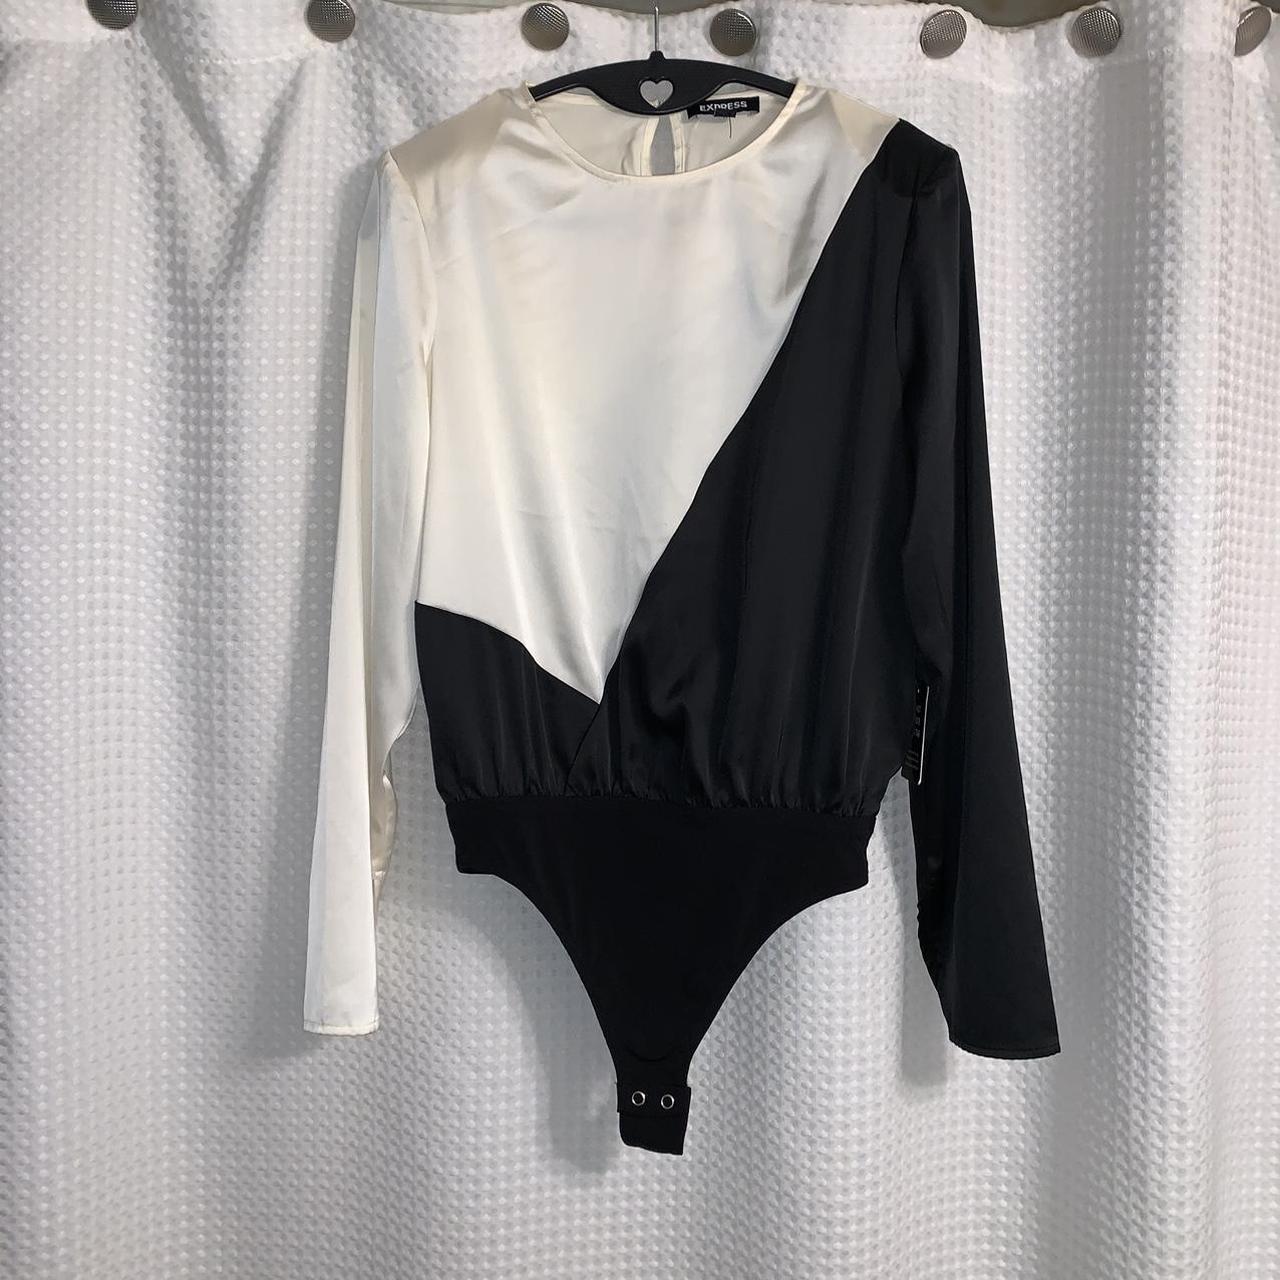 Express two toned body suit. NWT. Cream & black. - Depop